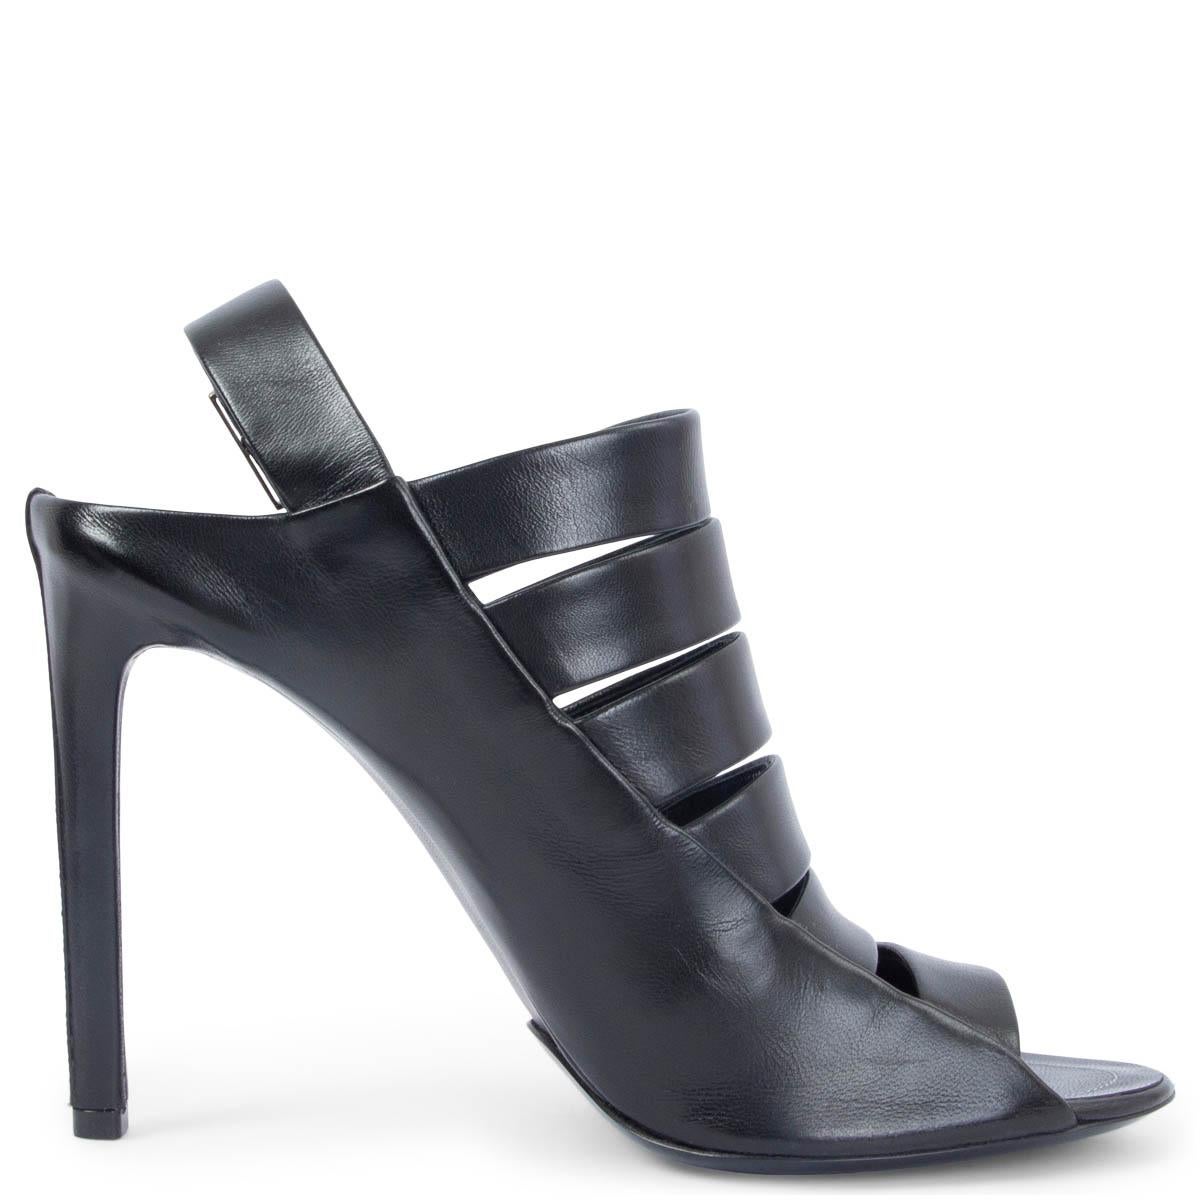 Black BALENCIAGA black leather STRAPPY Sandals Shoes 38 For Sale